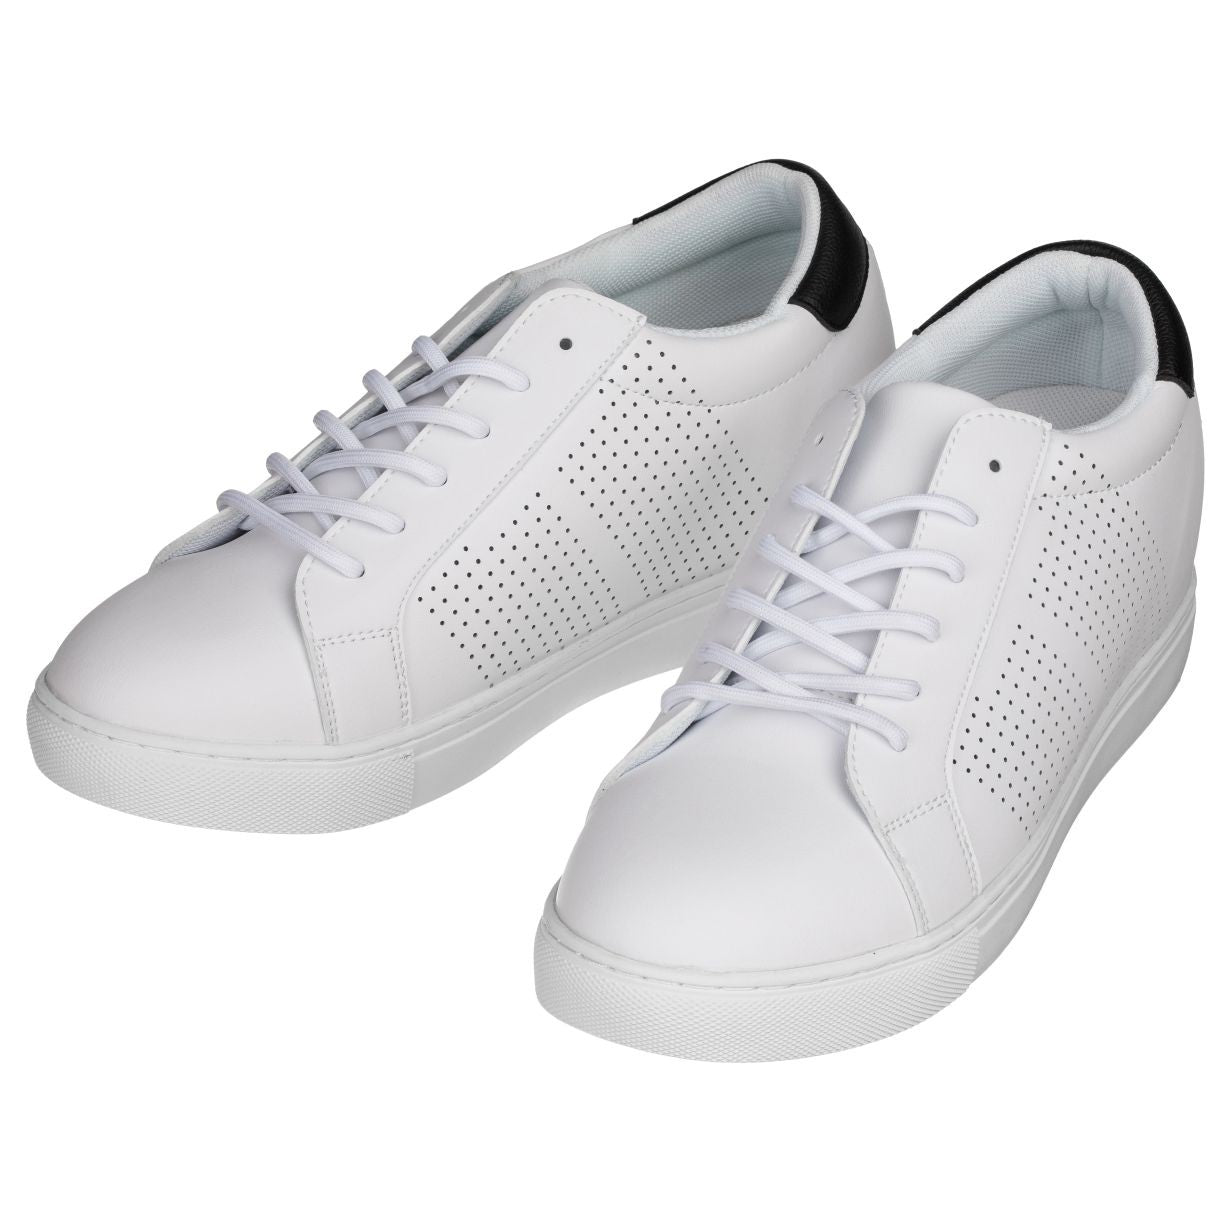 Elevator shoes height increase CALTO 2.6-Inch Taller White Elevator Sneakers